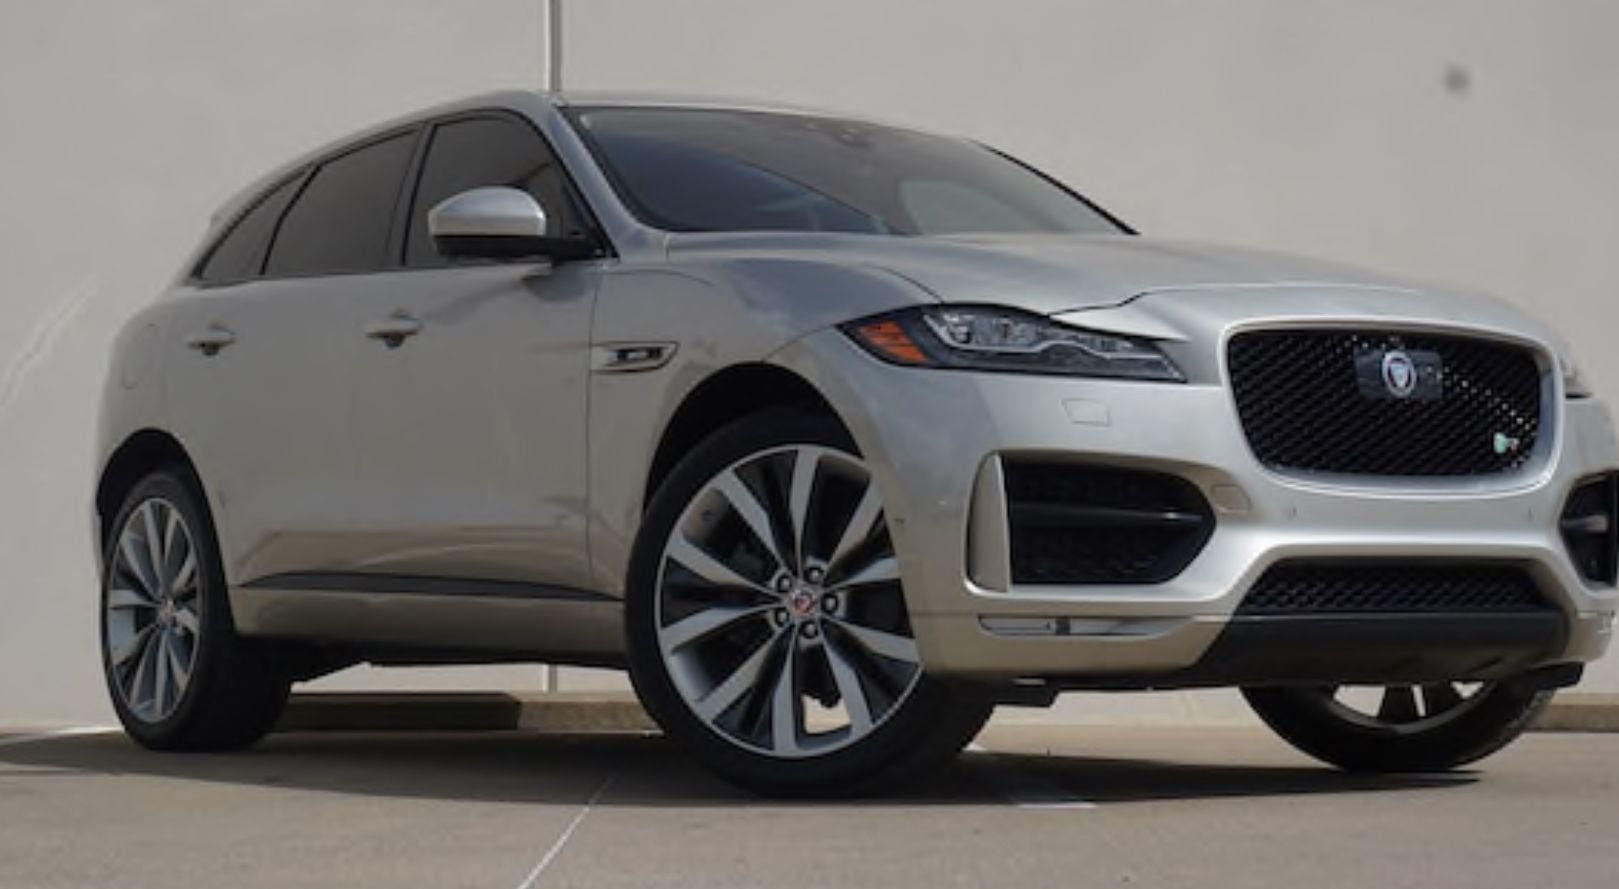 2017 Jaguar F-Pace - My old 2017, I have a 2019 now - Used - VIN SADCL2BV2HA074832 - 12,870 Miles - 6 cyl - AWD - Automatic - SUV - Silver - Frisco, TX 75034, United States